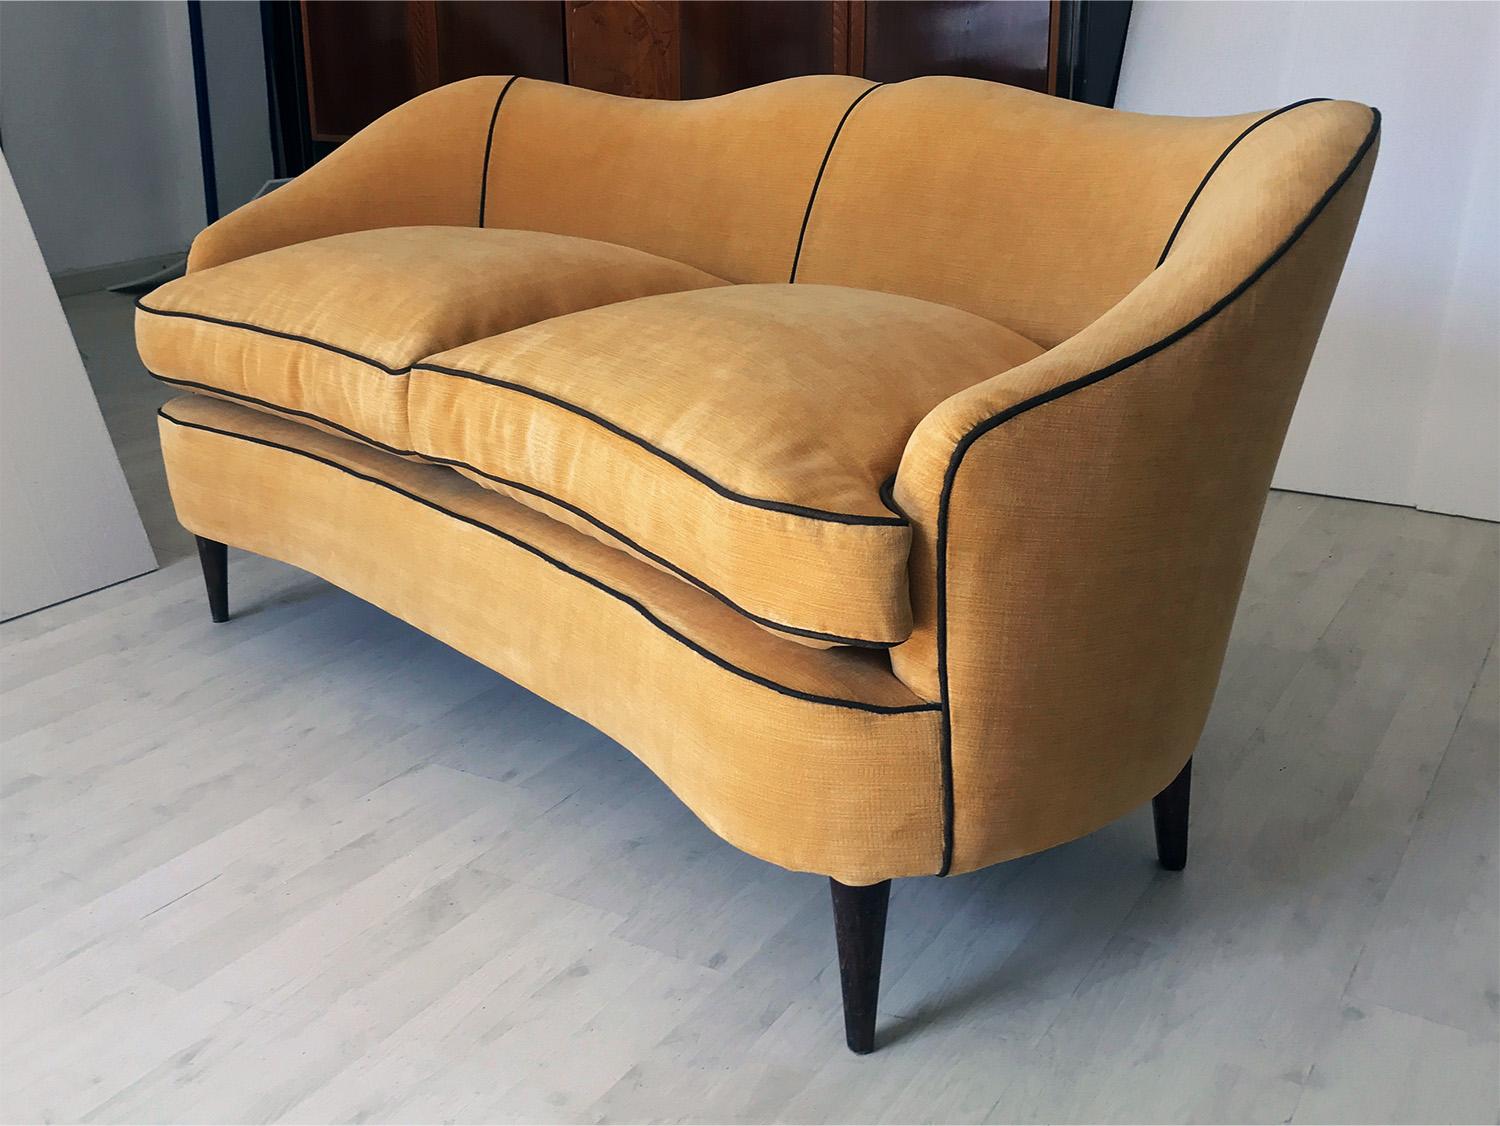 This stunning Italian sofa of the 1950s is very stylish, with two seats extremely comfortable upholstered in a gorgeus yellow velvet with striped texture and a very sturdy structure supported by conical wooden legs.
It’s a very well designed and